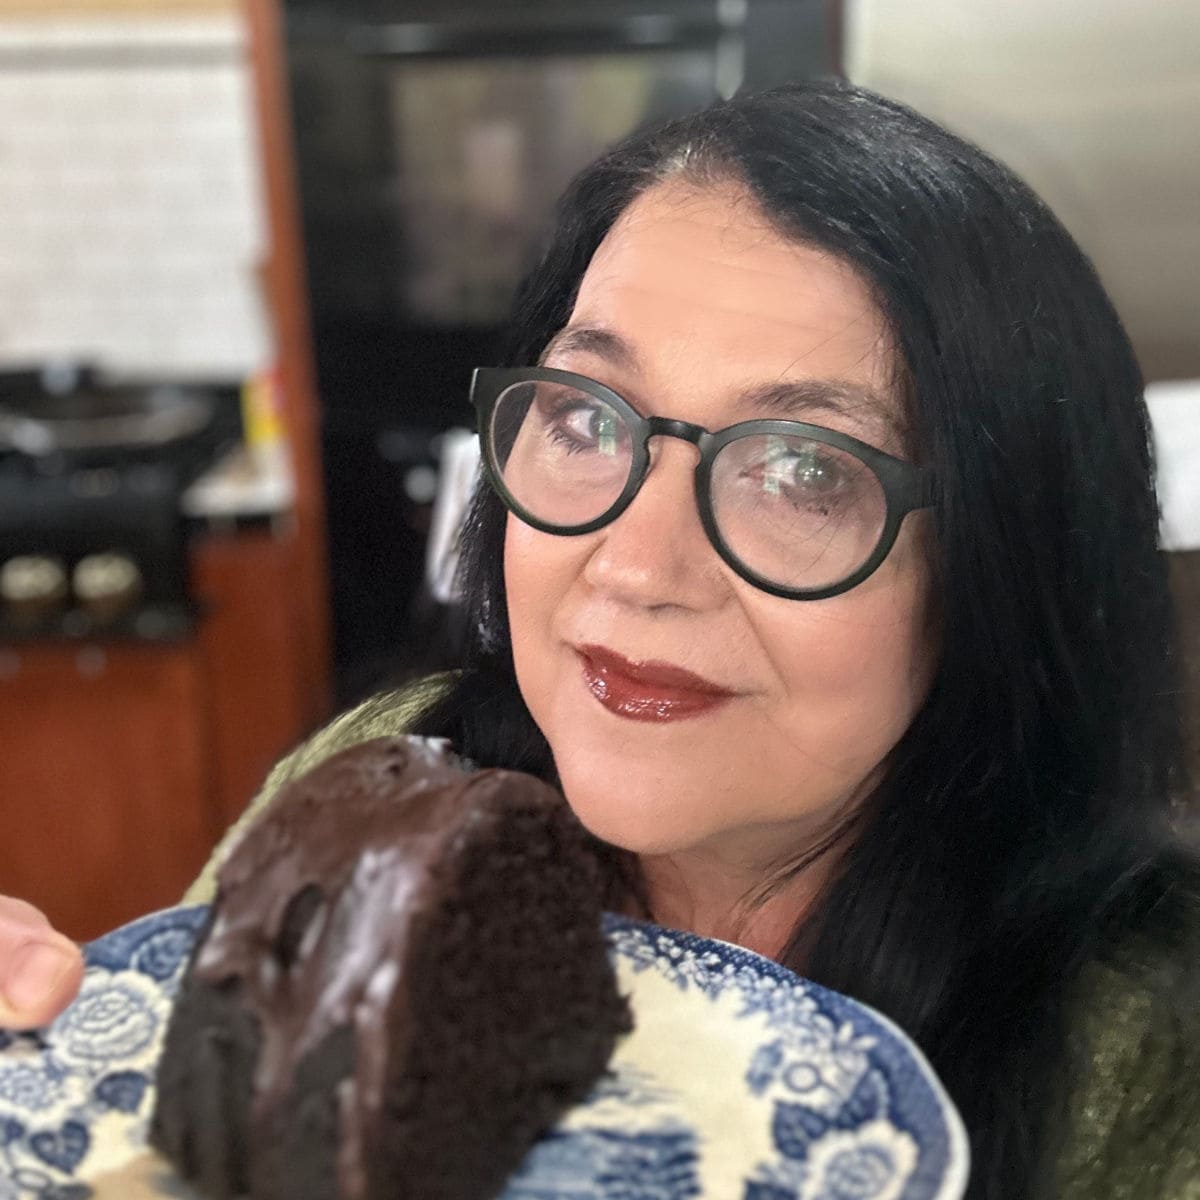 Marye Audet, Founder of Restless Chipotle, with a slice of dark chocolate bundt cake.